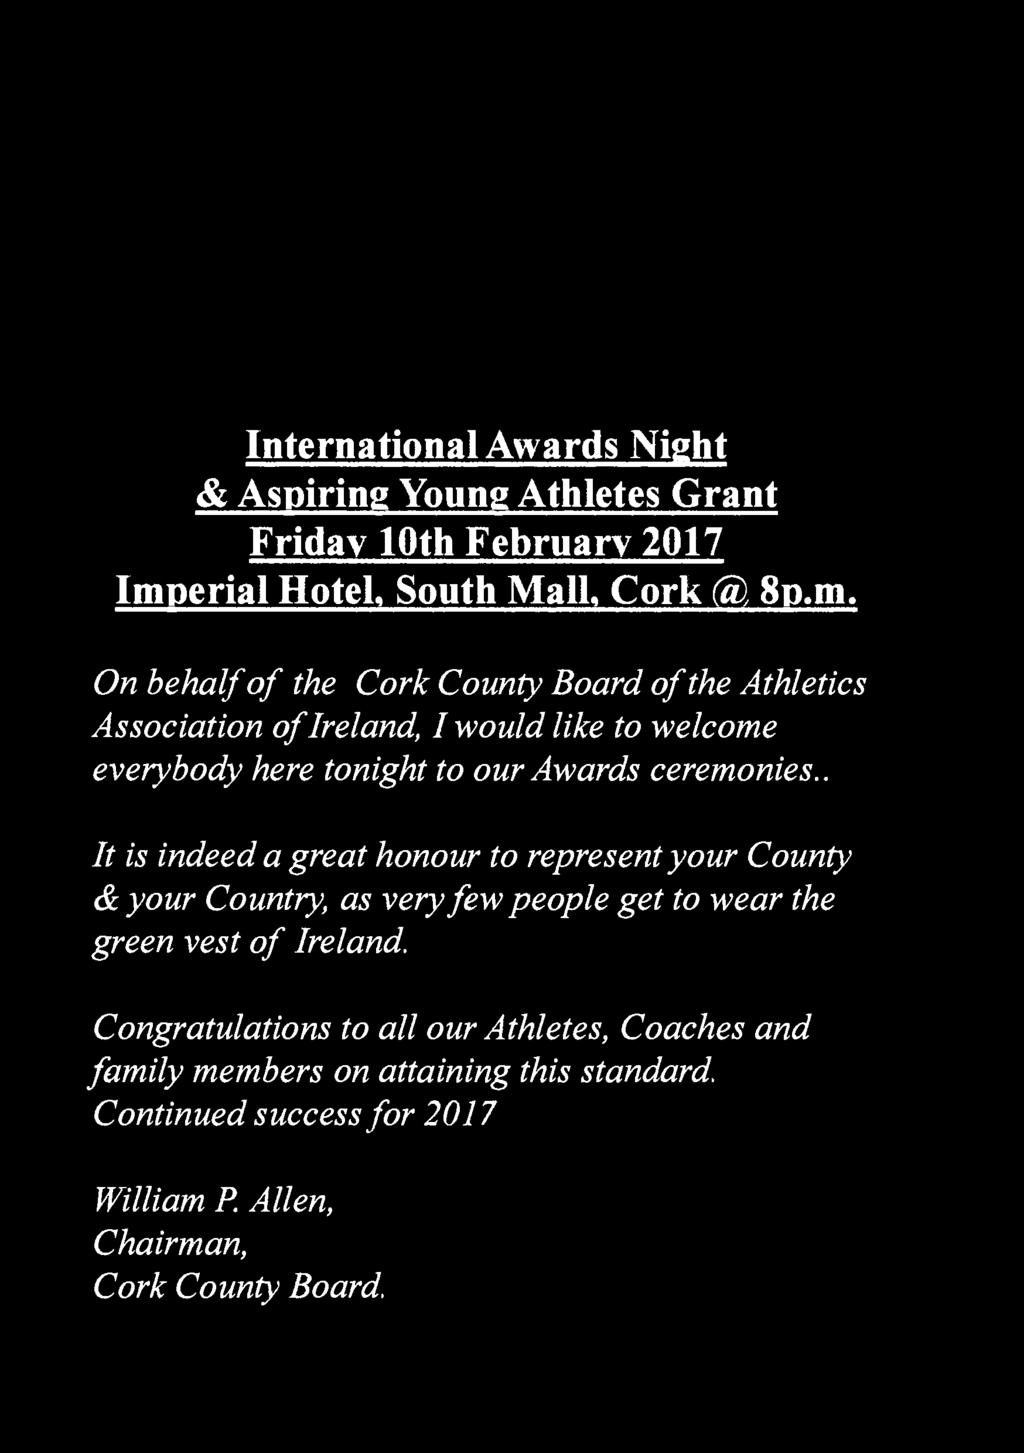 On behalf of the Cork County Board of the Athletics Association of Ireland, I would like to welcome everybody here tonight to our Awards